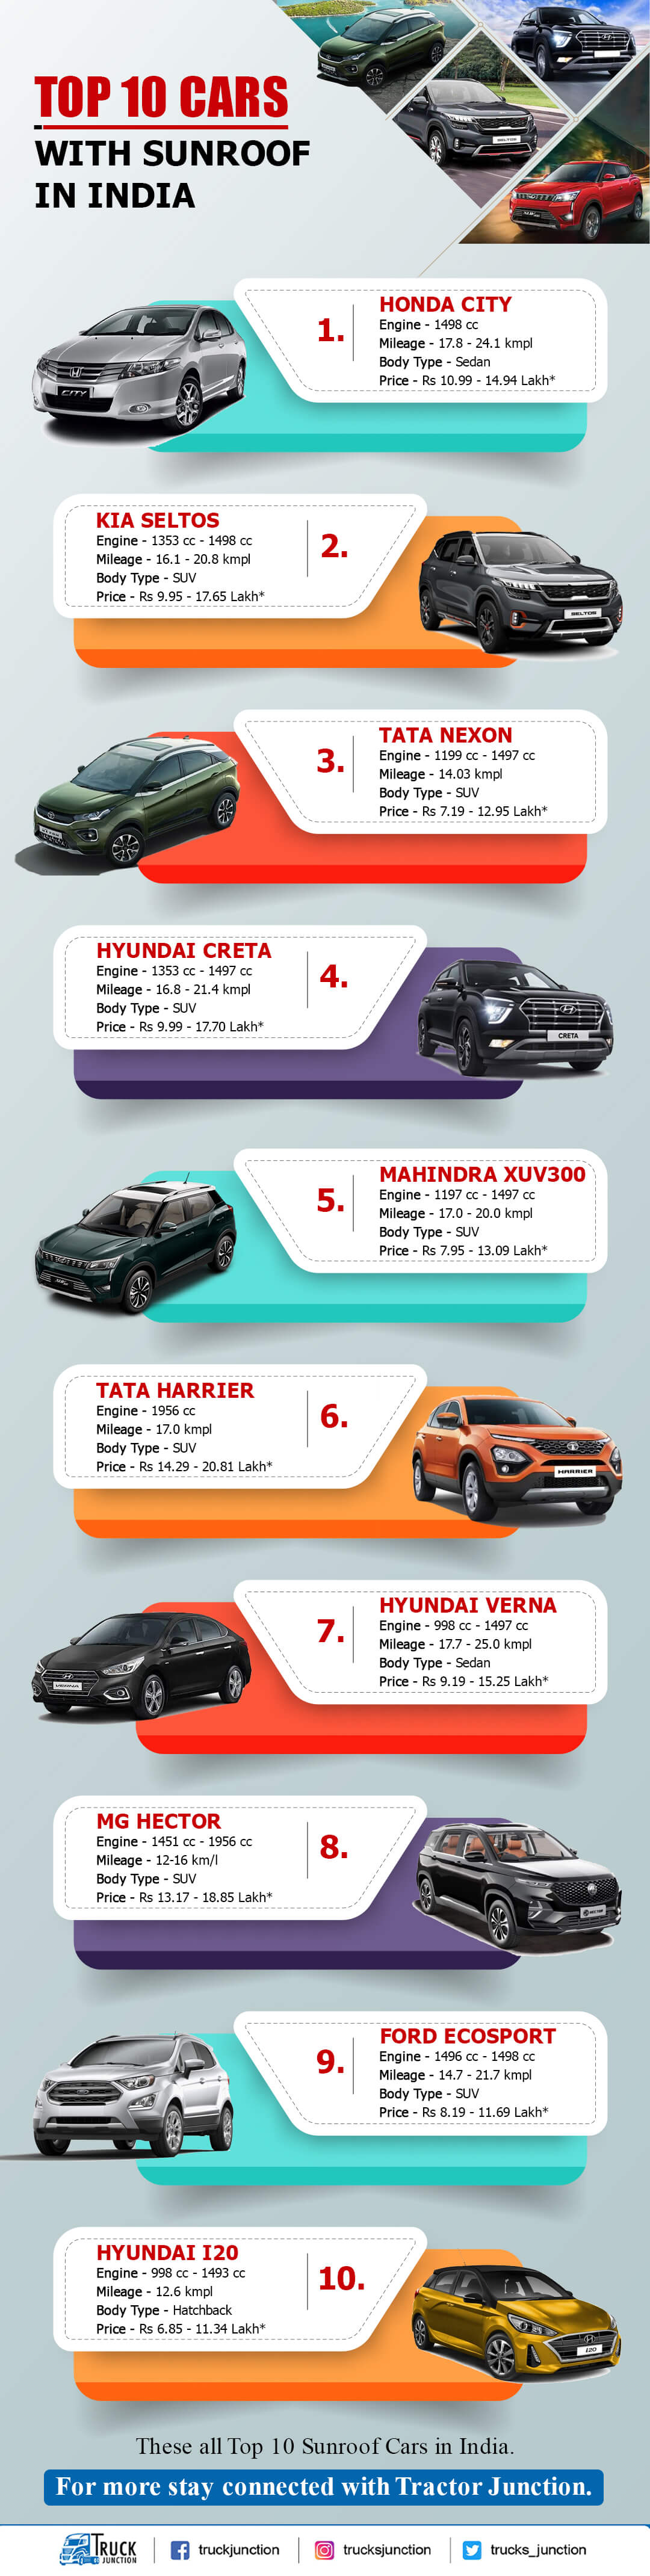 Top 10 Sunroof Car in India infographic